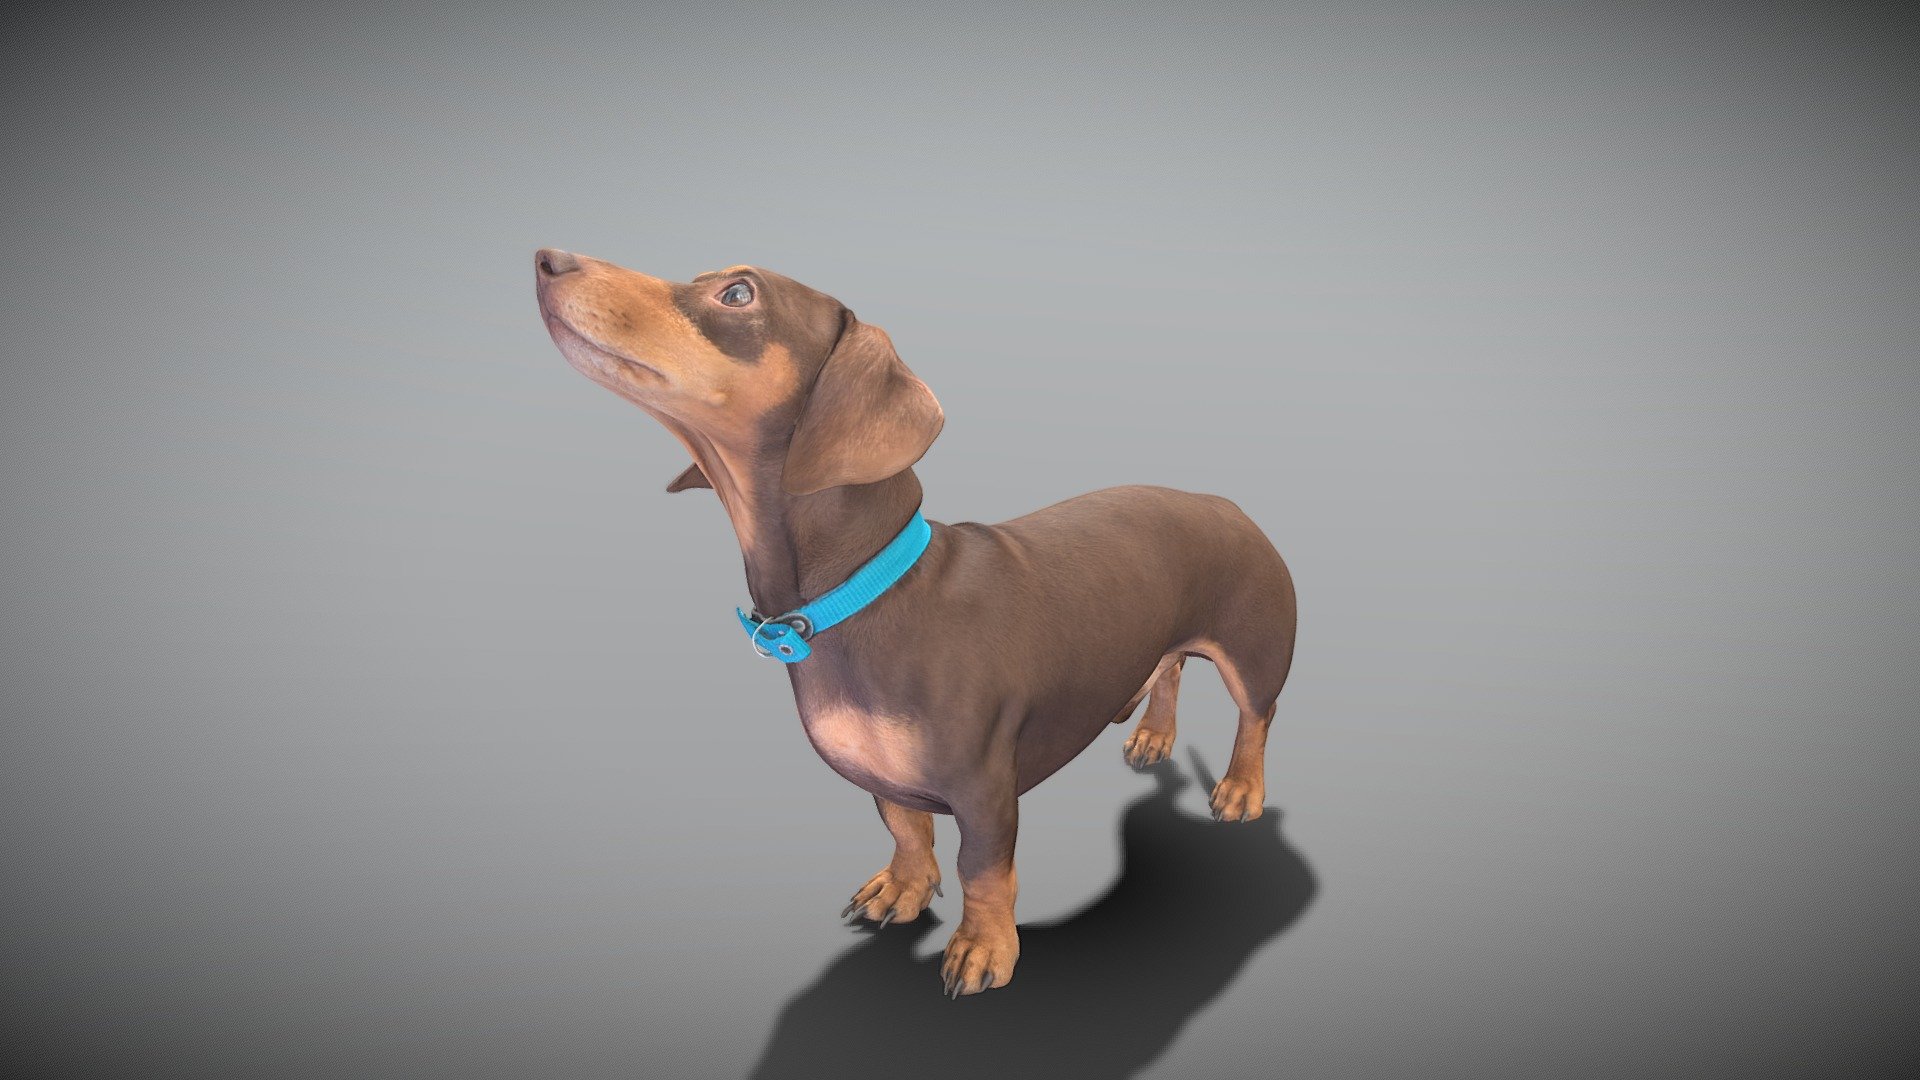 This is a true sized and highly detailed model of a young charming Dachshund dog. It will add life and coziness to any architectural visualisation of houses, playgrounds, parques, urban landscapes, etc. This model is suitable for game engine integration, VR/AR content, etc.

Technical specifications:




digital double 3d scan model

150k &amp; 30k triangles | double triangulated

high-poly model (.ztl tool with 5 subdivisions) clean and retopologized automatically via ZRemesher

sufficiently clean

PBR textures 8K resolution: Diffuse, Normal, Specular maps

non-overlapping UV map

no extra plugins are required for this model

Download package includes a Cinema 4D project file with Redshift shader, OBJ, FBX, STL files, which are applicable for 3ds Max, Maya, Unreal Engine, Unity, Blender, etc. All the textures you will find in the “Tex” folder, included into the main archive.

3D EVERYTHING

Stand with Ukraine! - Playful dachshund dog 35 - 3D model by deep3dstudio 3d model